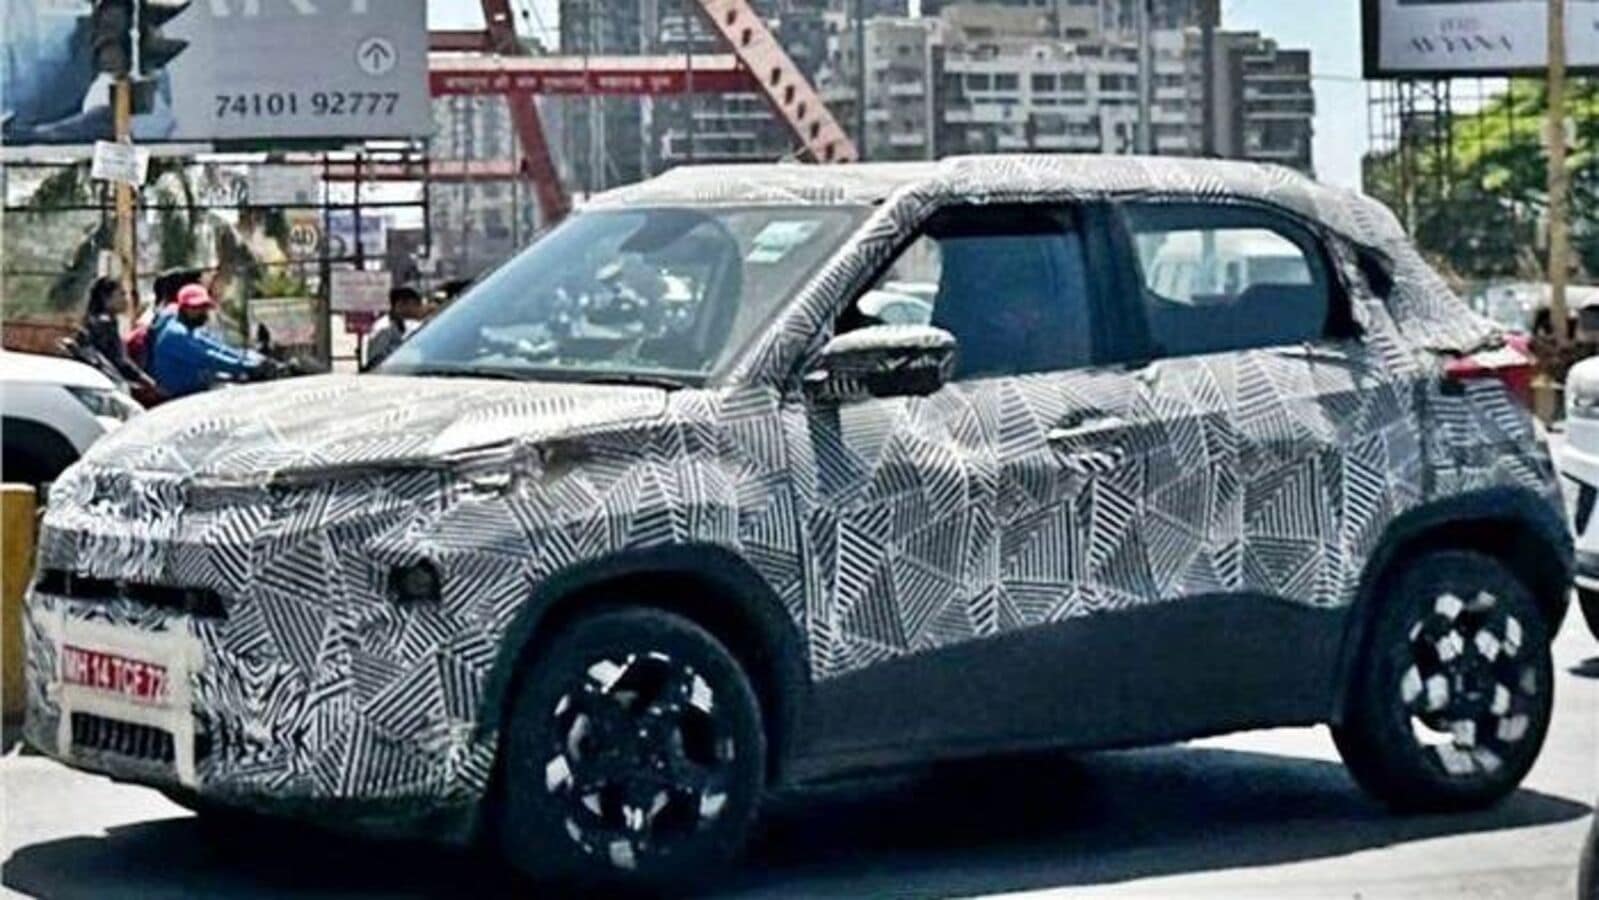 Tata Punch facelift spied being tested with similar design as EV. Check details